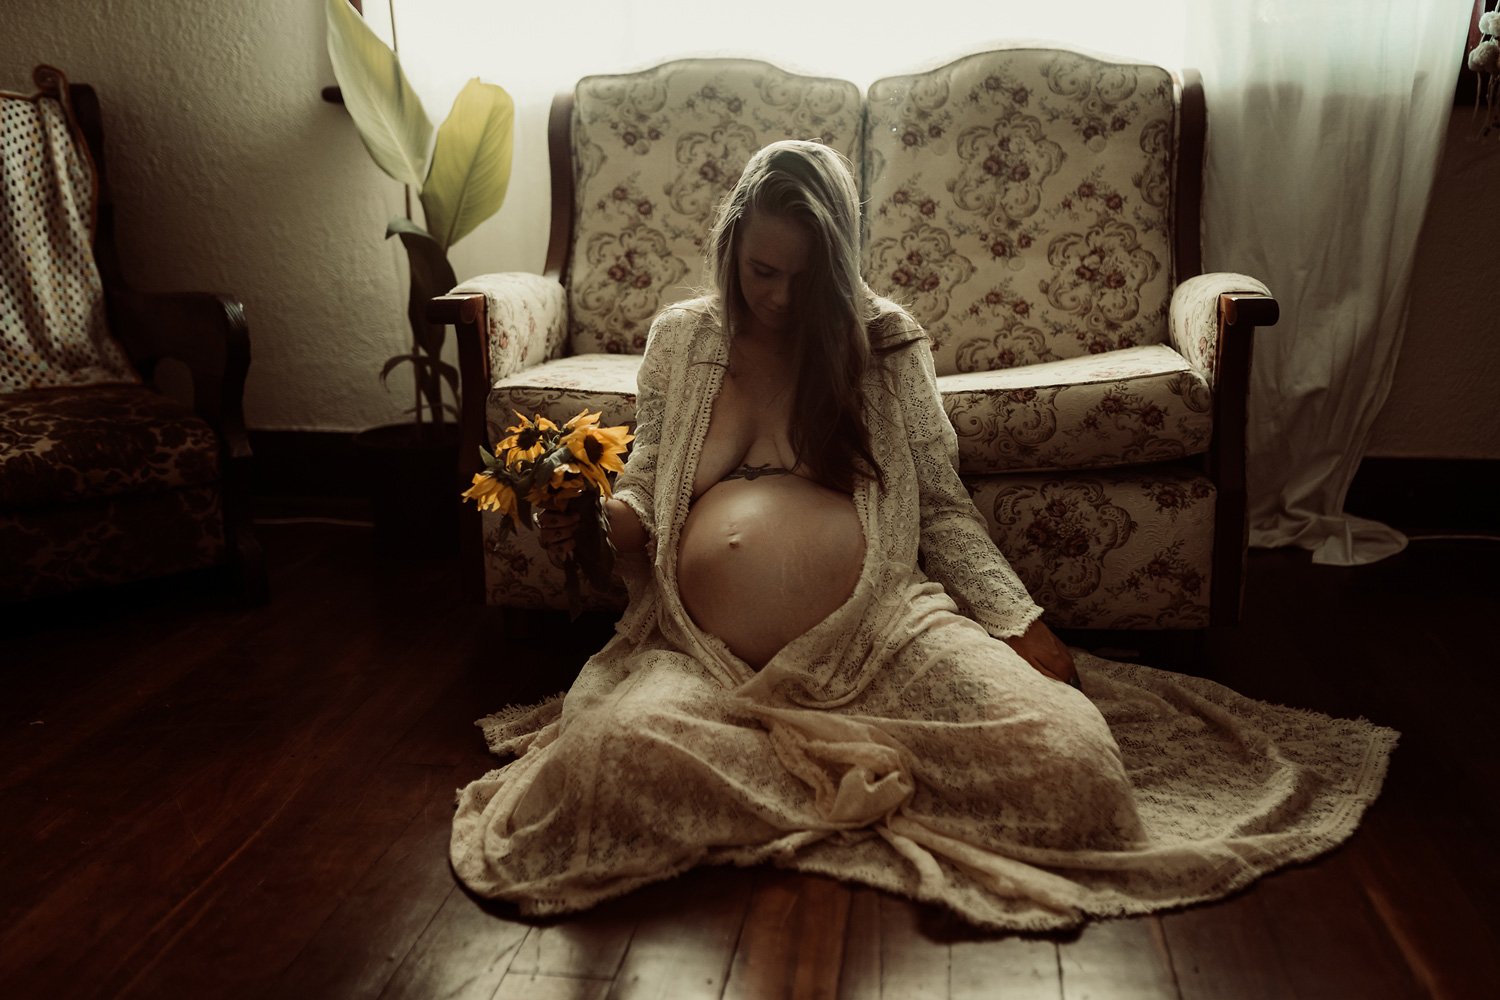 Maternity-photography-at-home.jpg